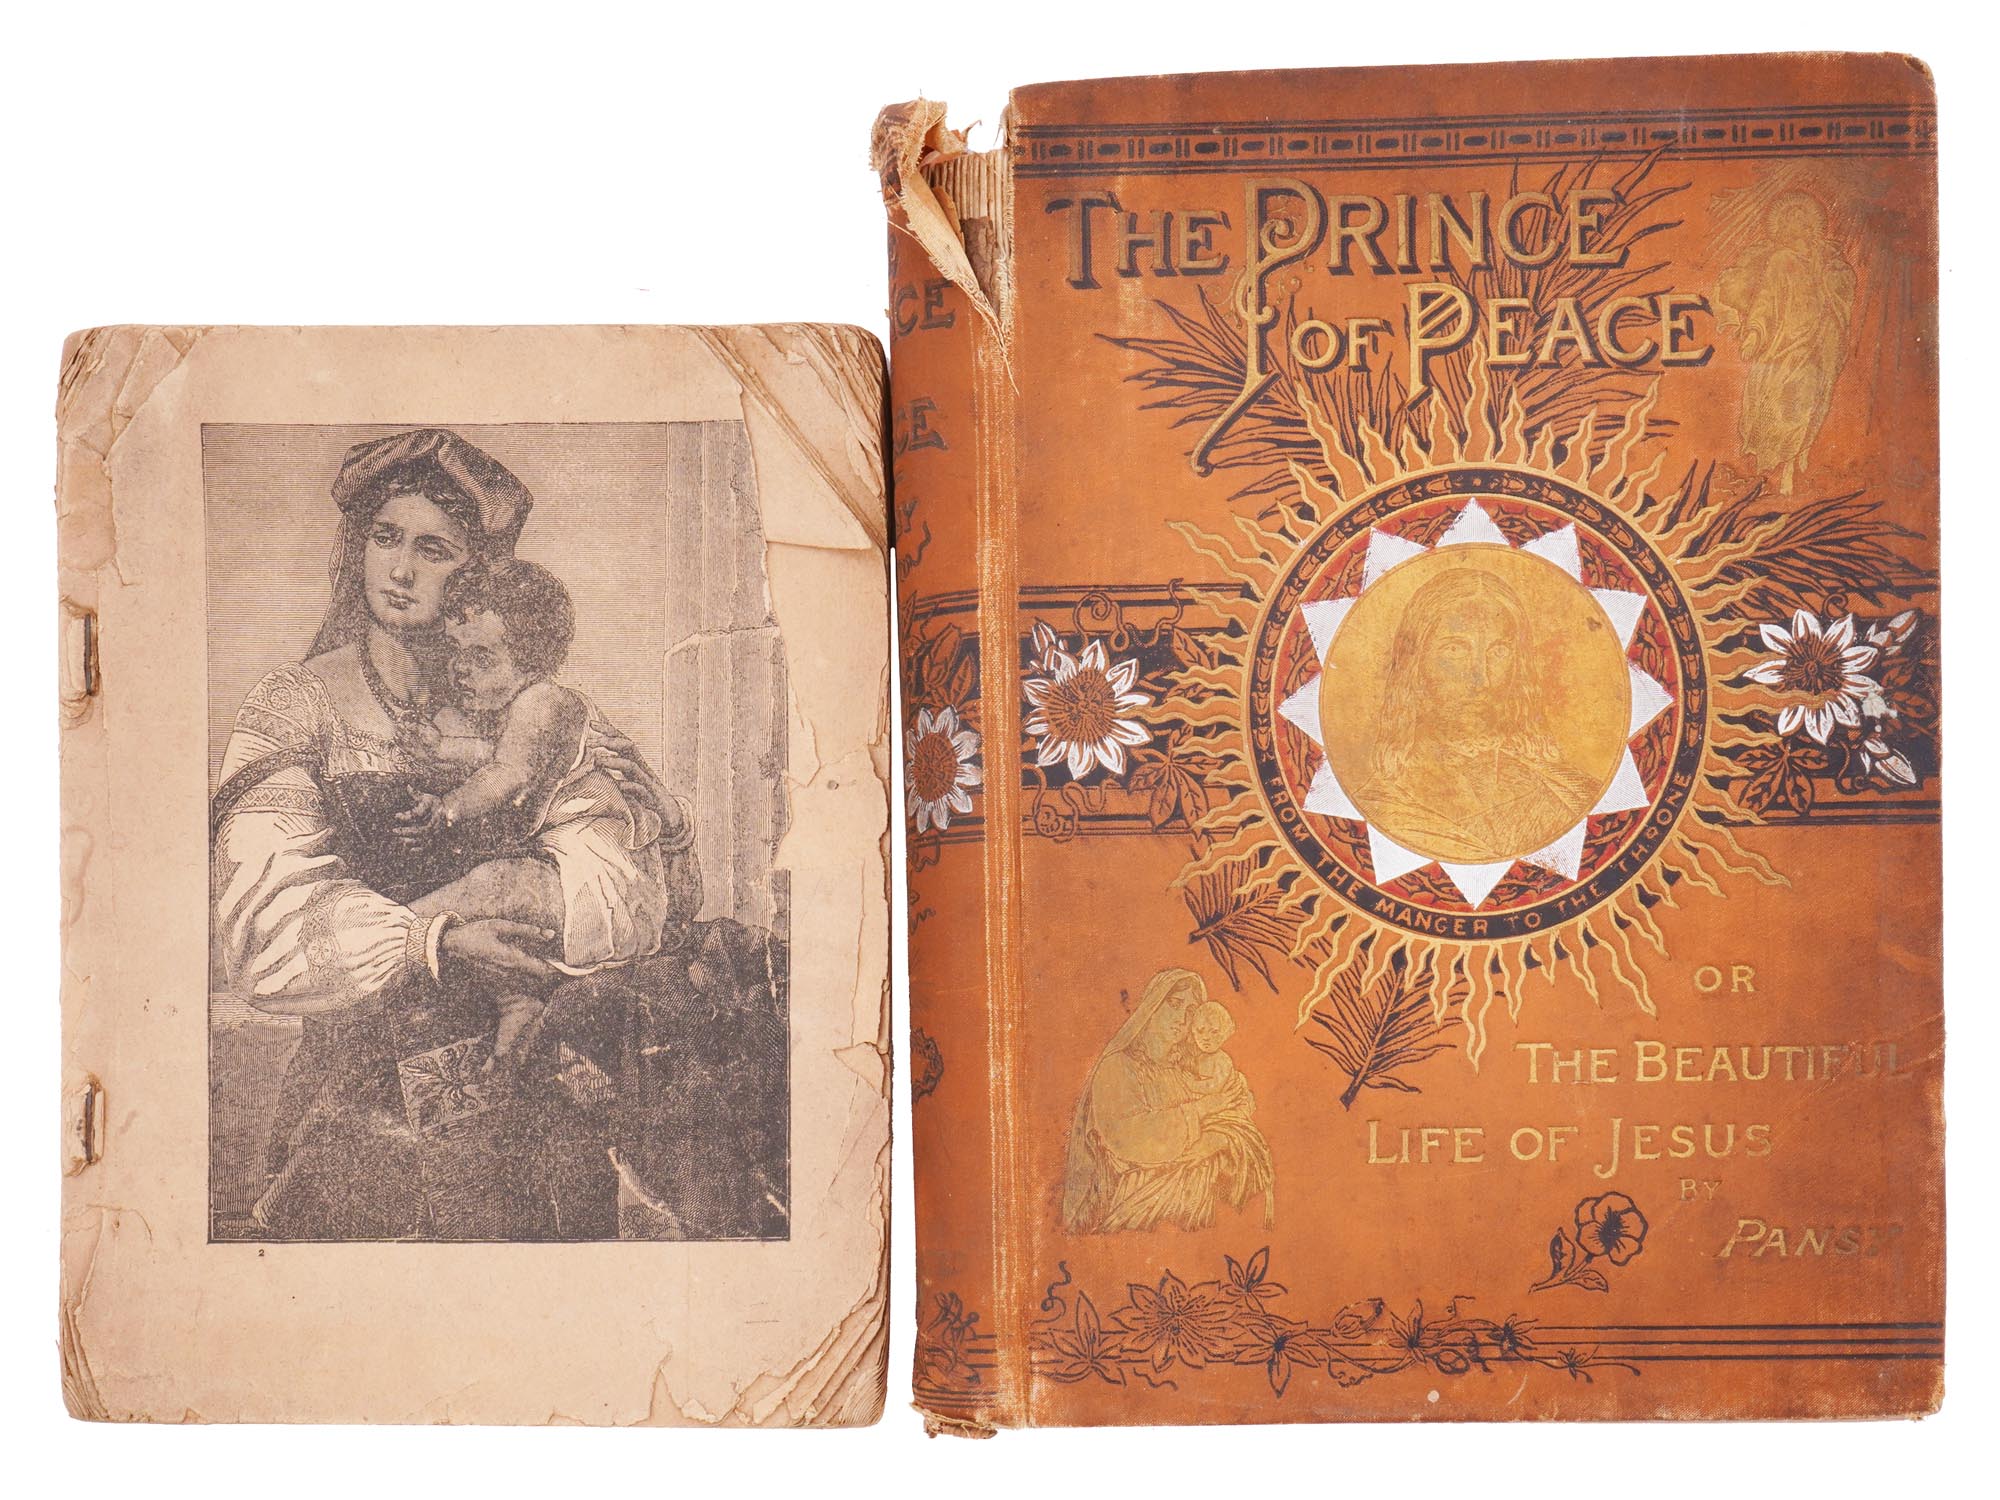 1890 ILLUSTRATED BOOK PRINCE OF PEACE BY PANSY PIC-0